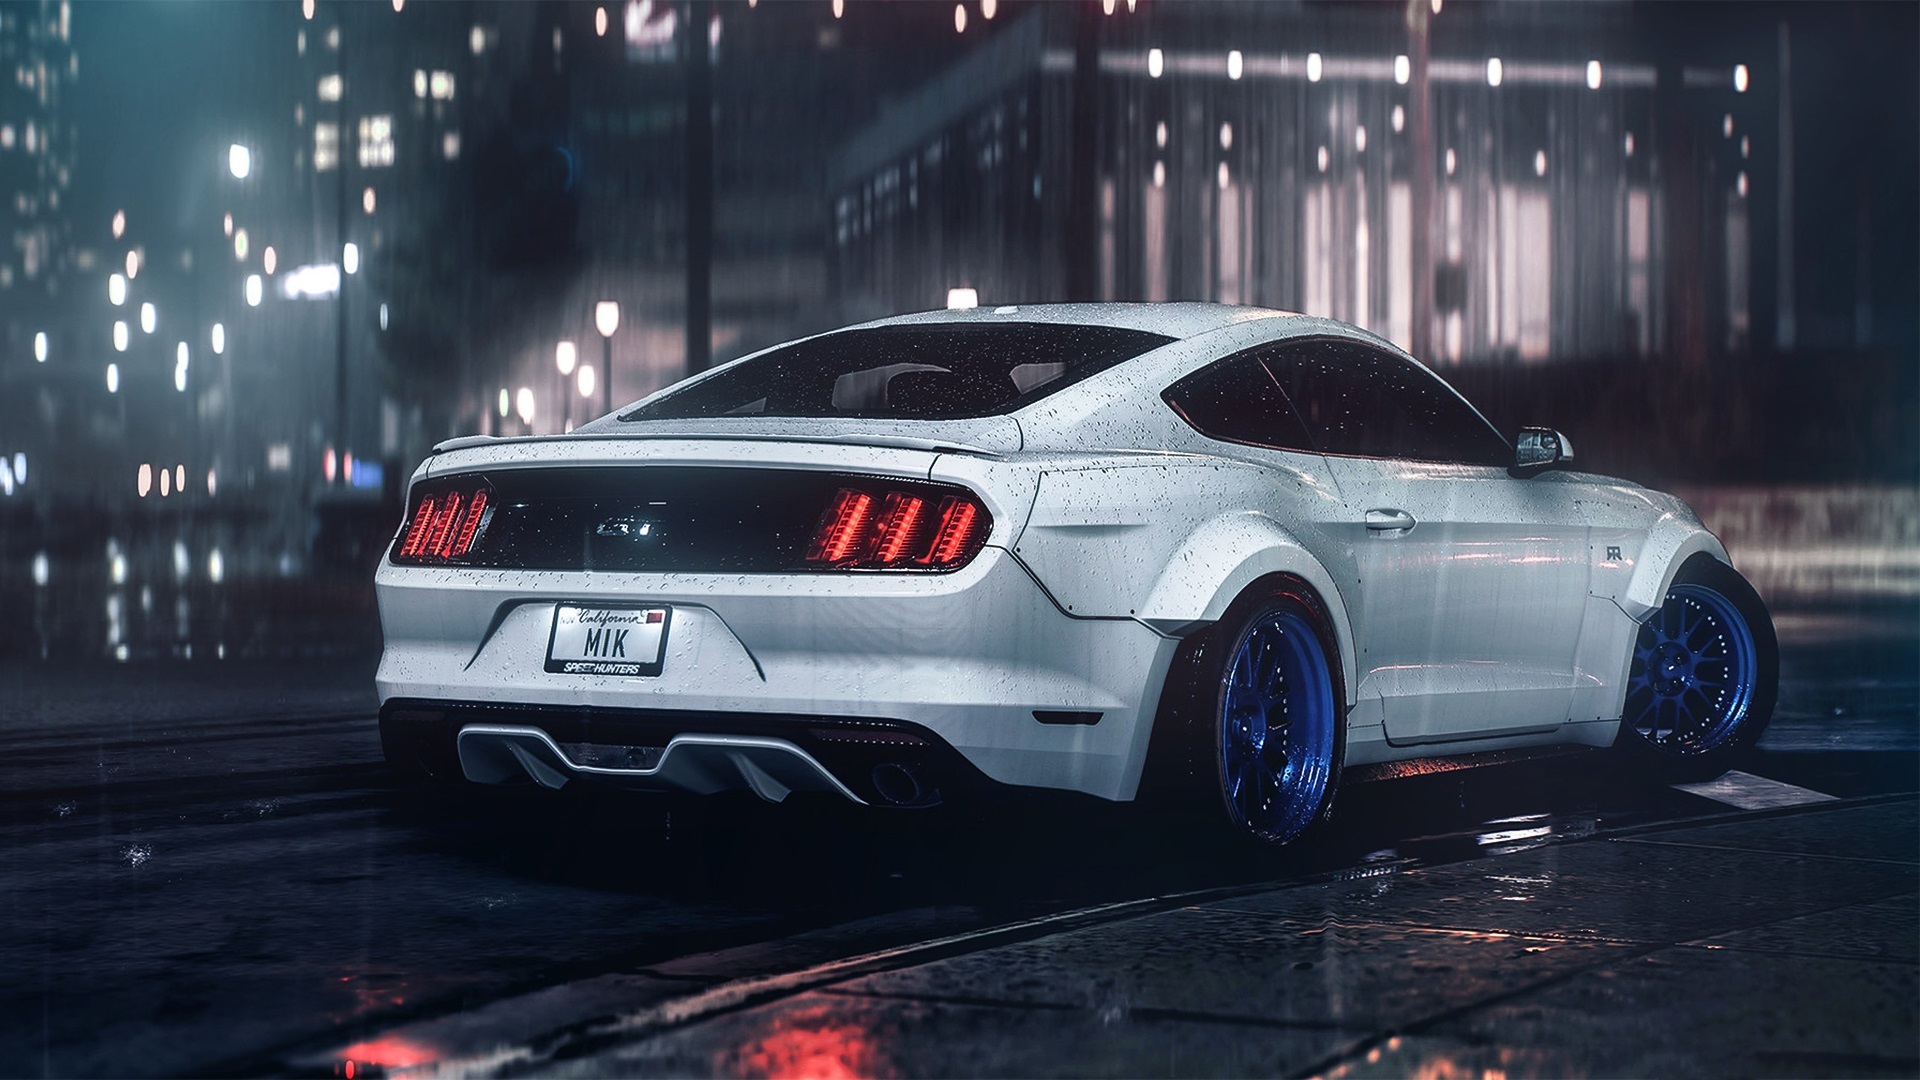 Ford Mustang GT Wallpapers, Pictures, Images